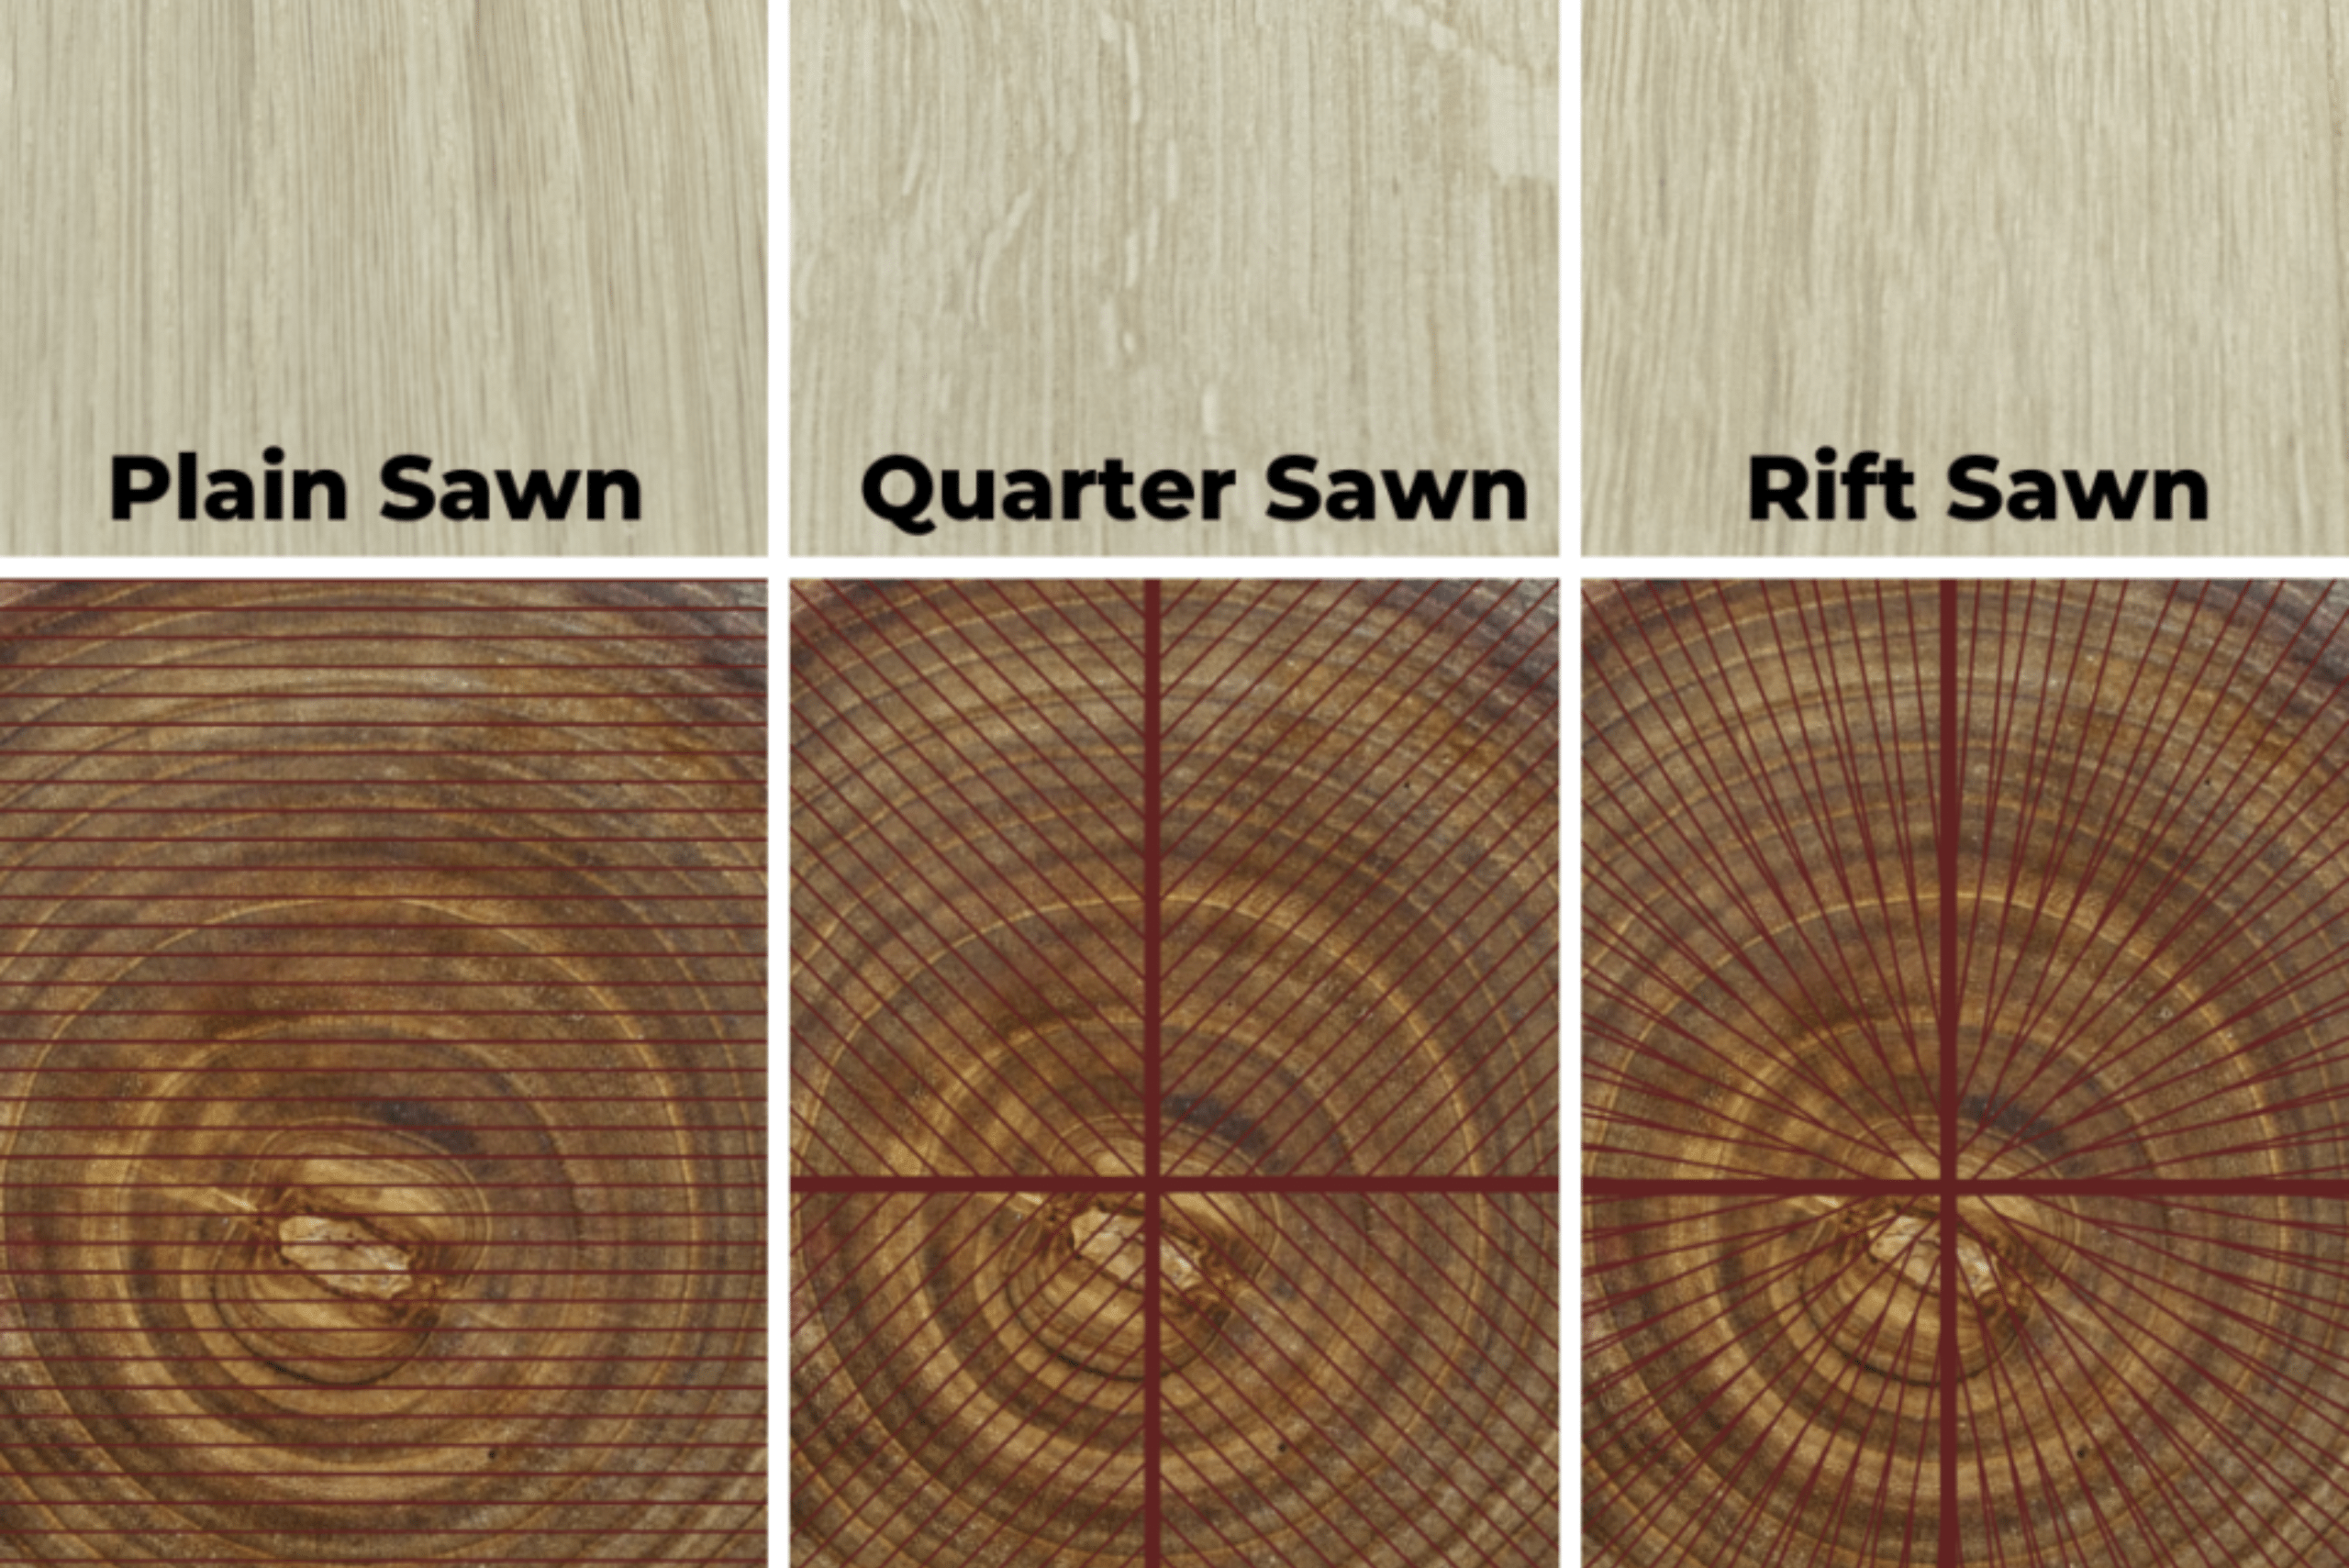 Top images are examples of plain sawn, quarter sawn, and rift sawn wood with cutting illustration below for each.